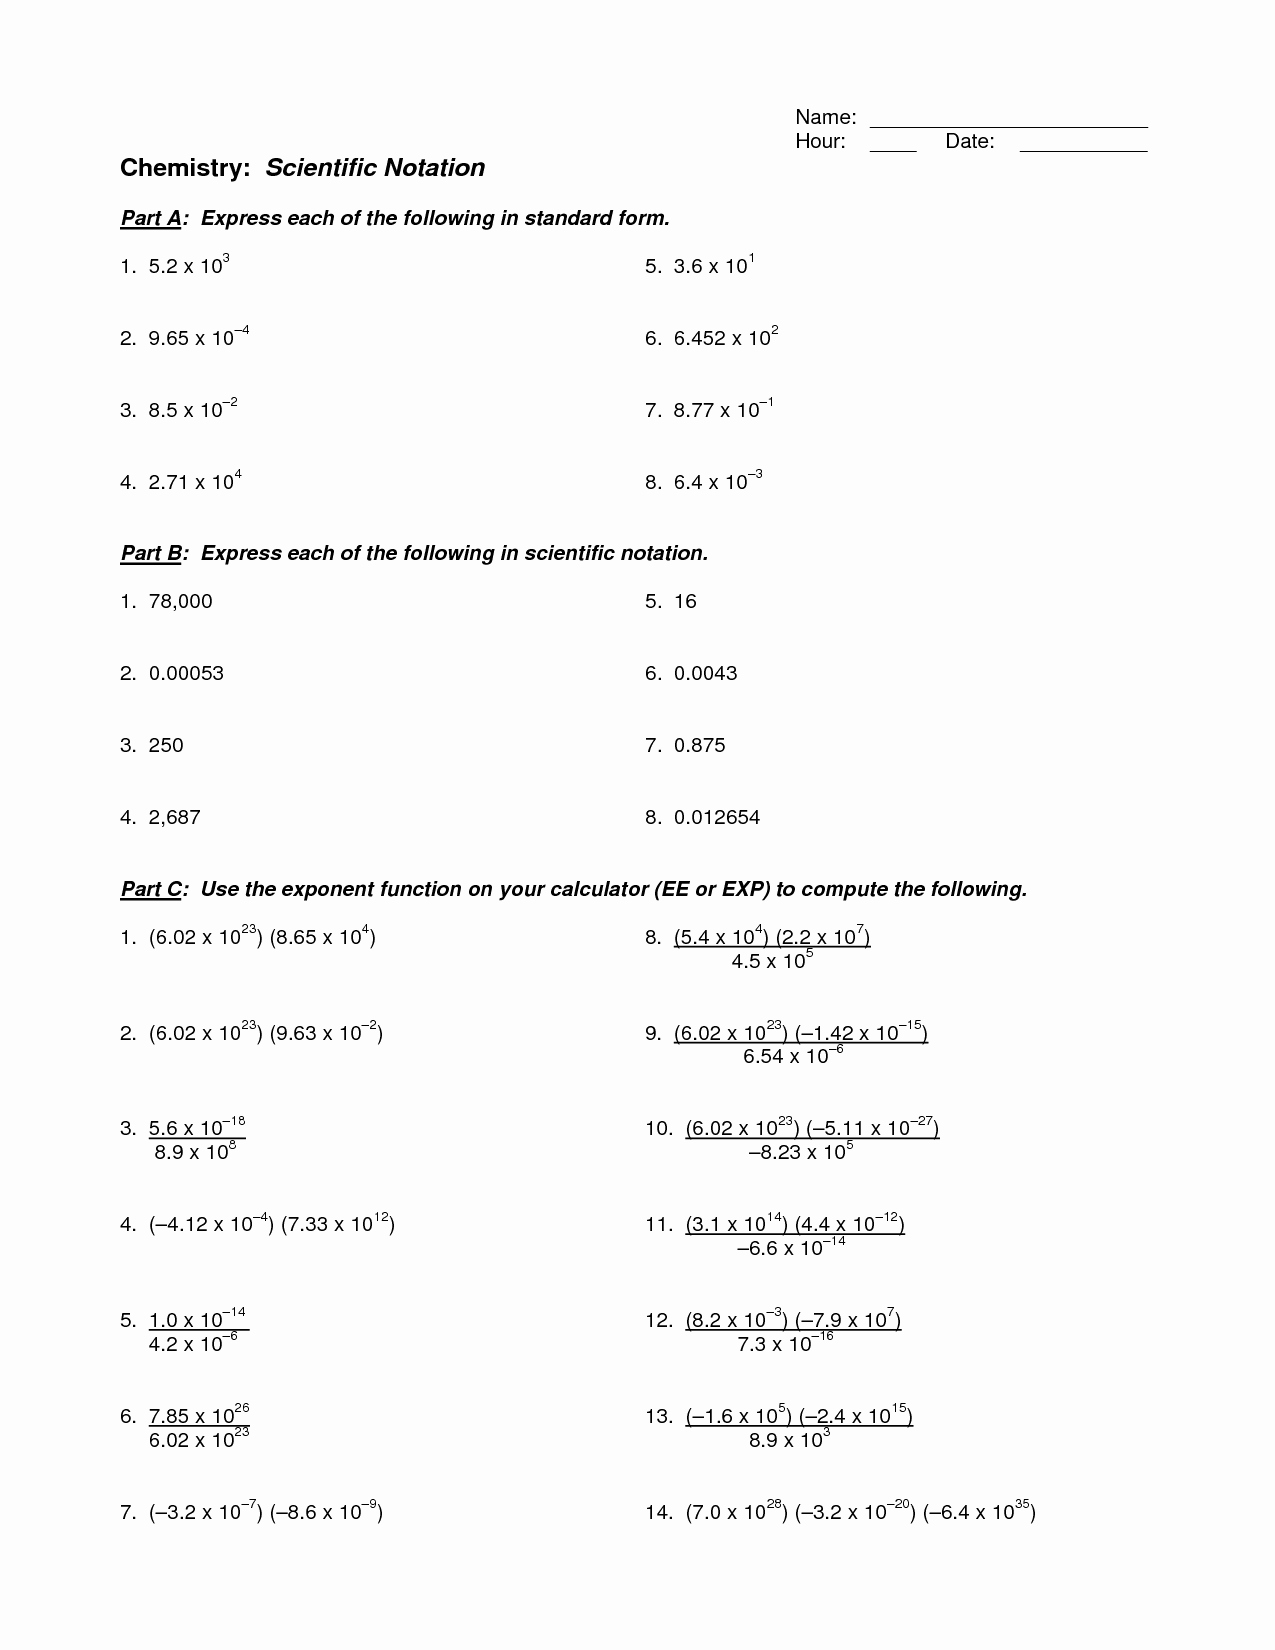 Operations with Scientific Notation Worksheet Beautiful Worksheet Scientific Notation